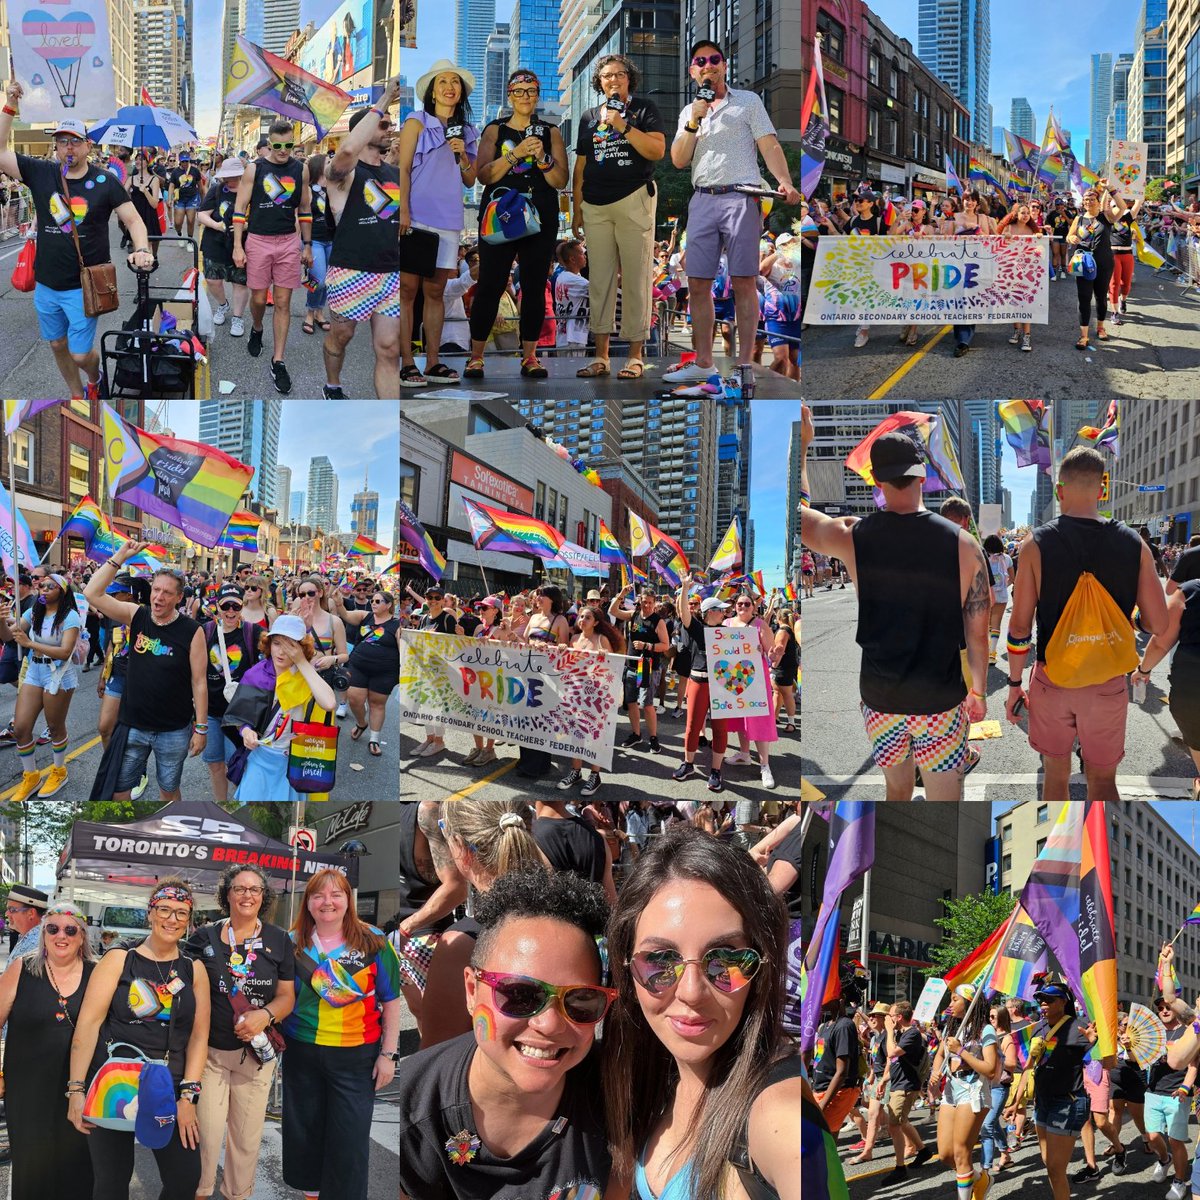 #OSSTF/FEESO members marching in the @pridetoronto parade to celebrate the #2slgbtqia community, but more importantly, to be visible & push back against increased hate. Everyone has the right to have a safe & inclusive life. #Pride2023 #pridemonth #2slgbtqbelonging #OntEd